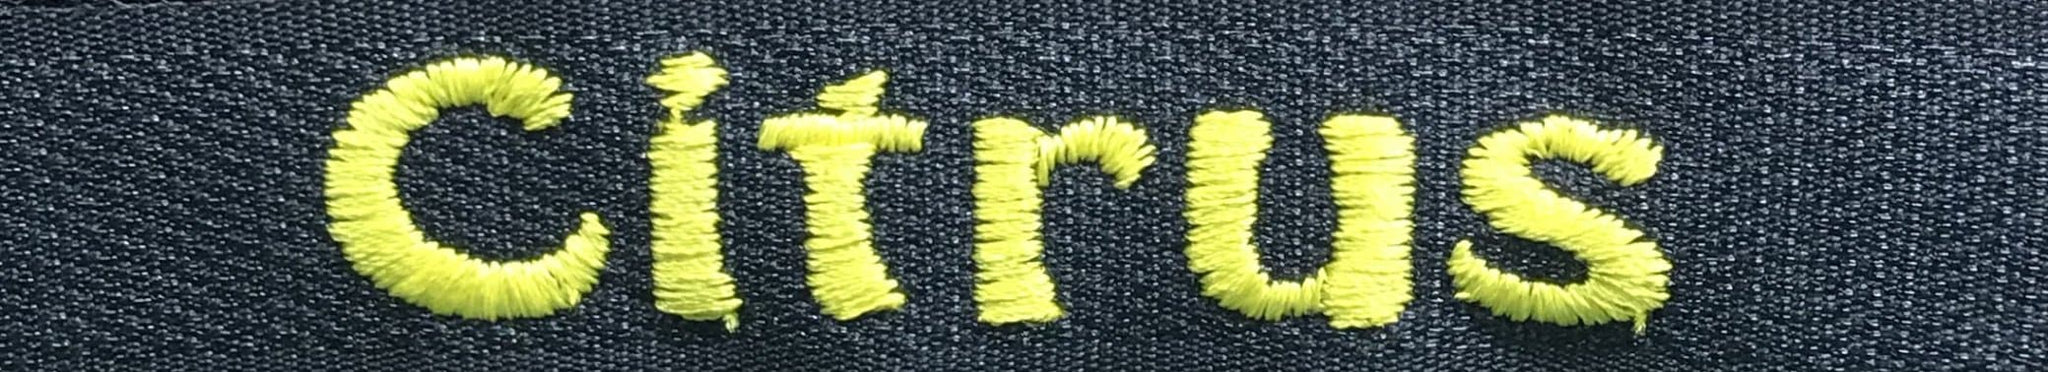 citrus embroidery example